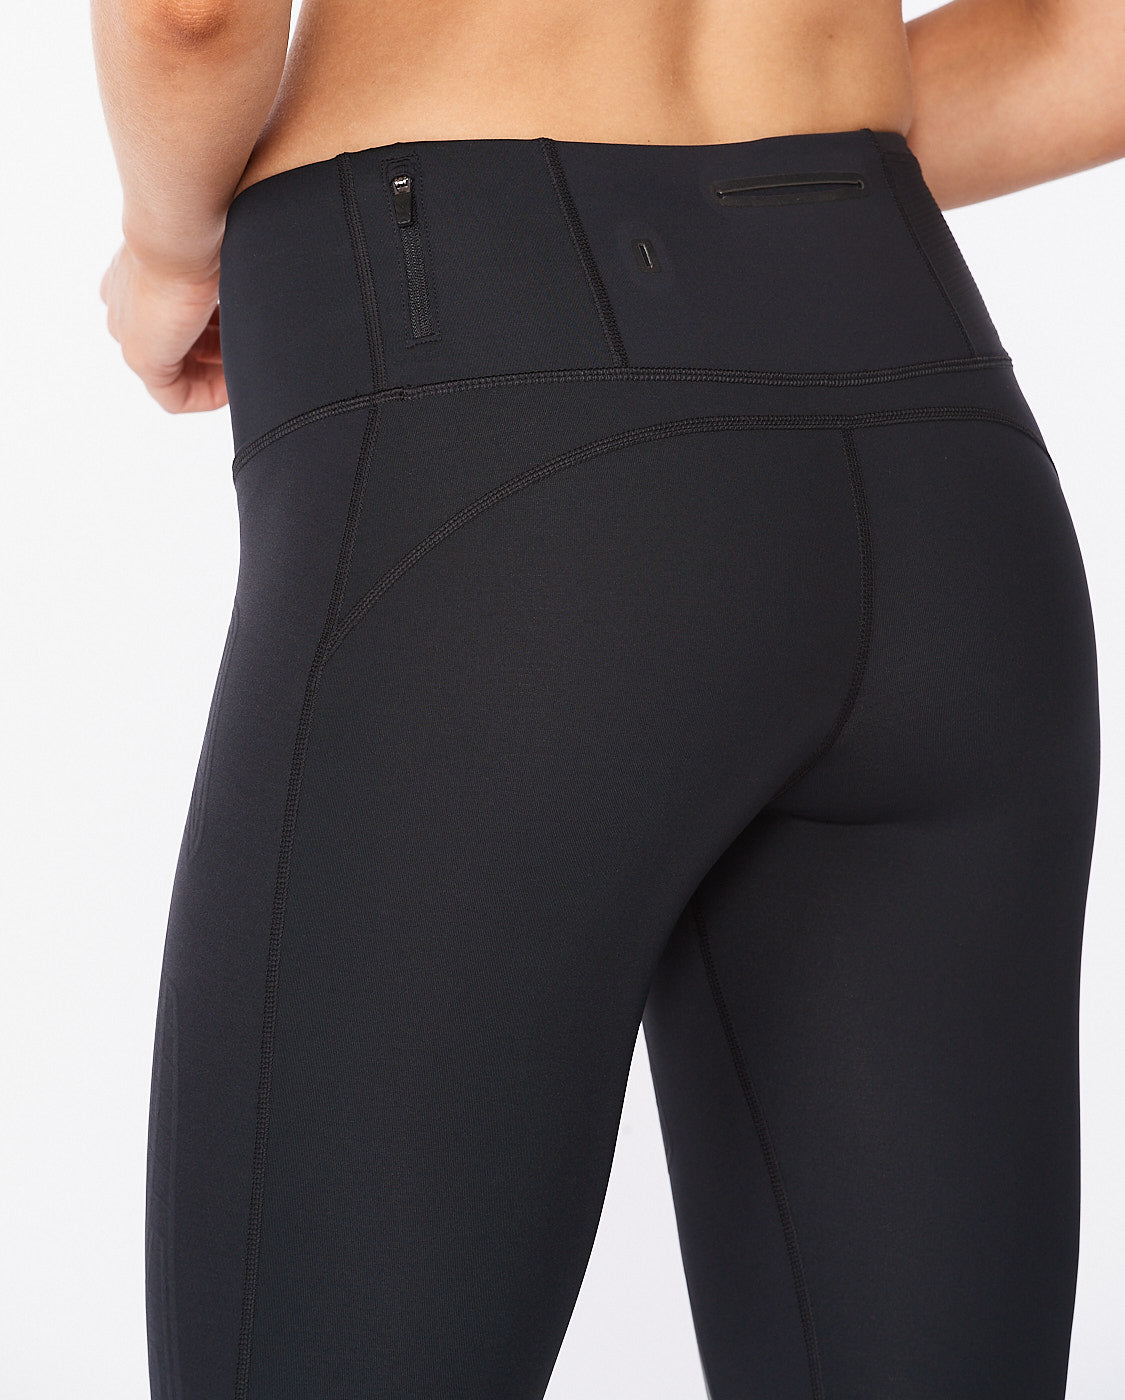 Mid-Rise Full Length Low And Flow Legging